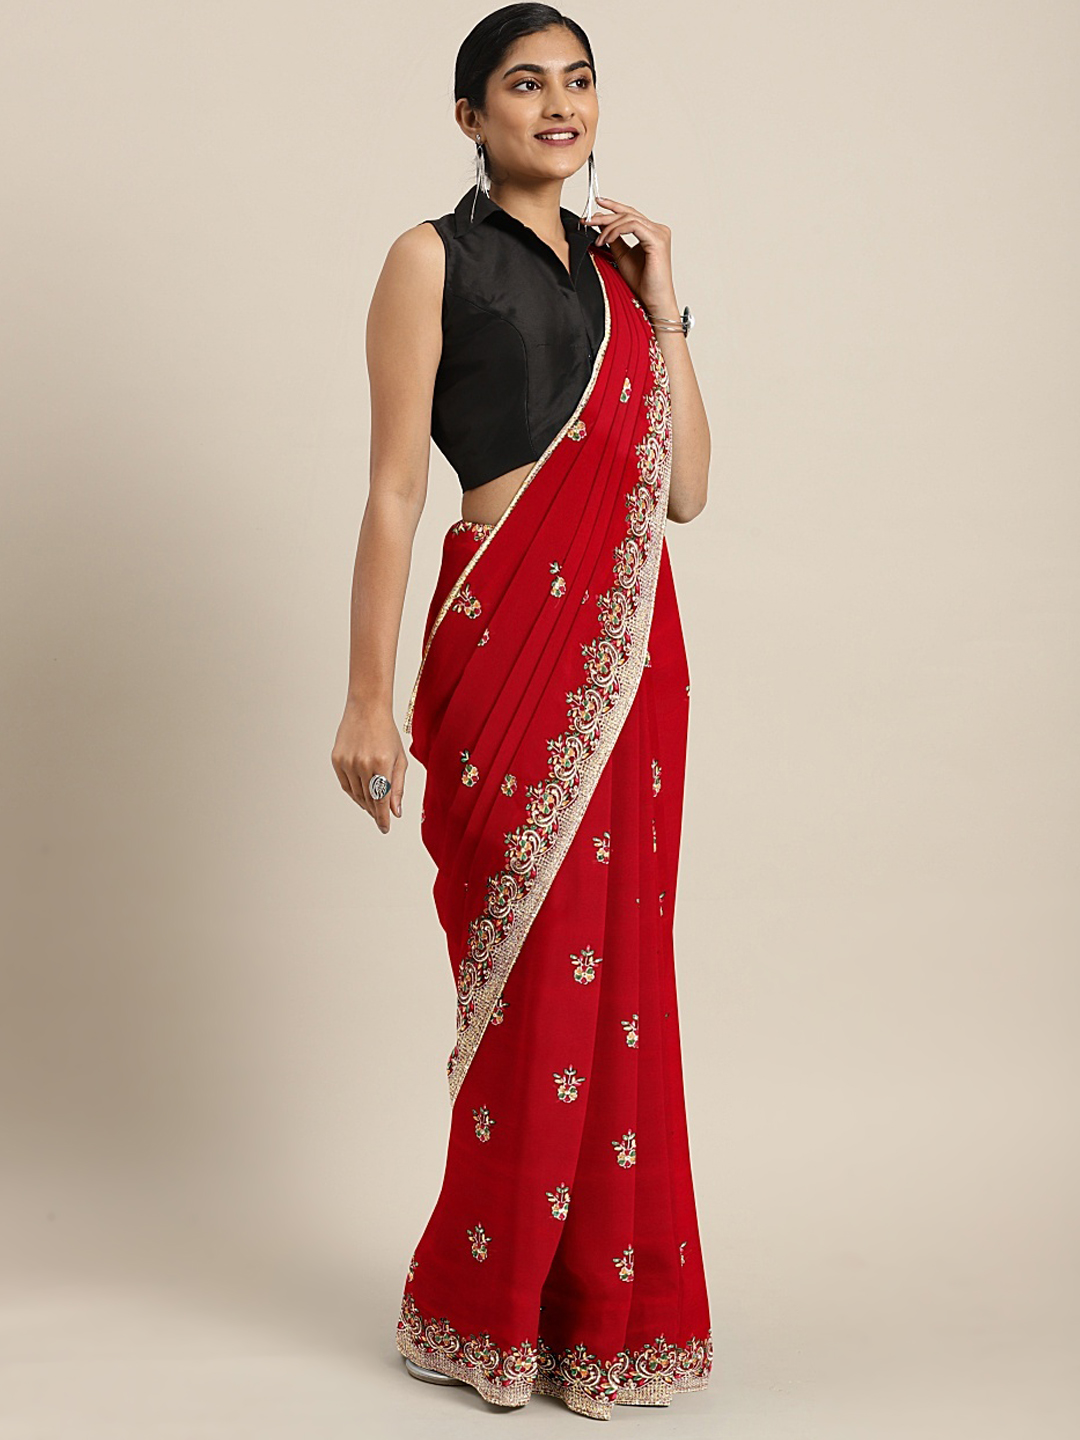 Soch Red Embroidered Poly Georgette Saree Price in India